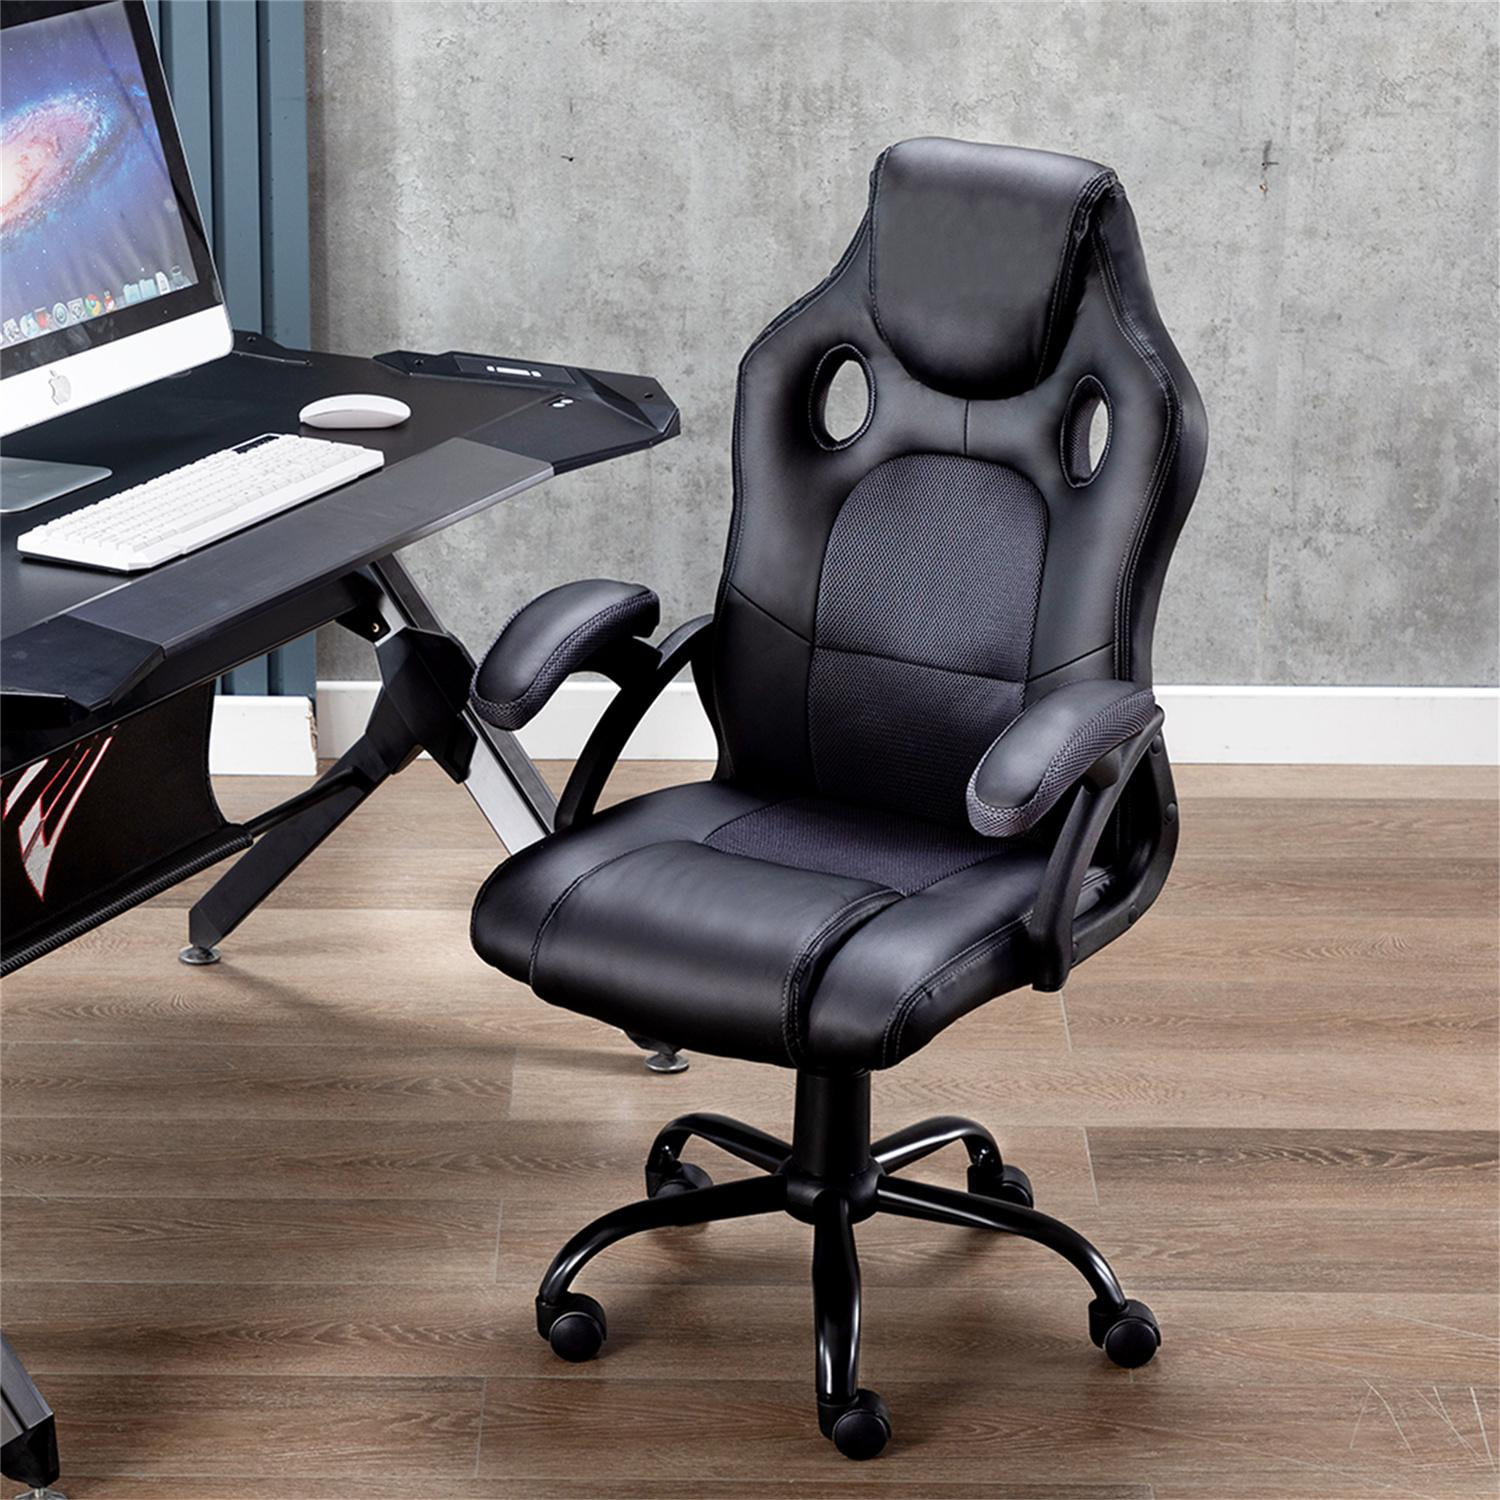 Executive Racing Gaming Computer Office Chair Adjustable Swivel Recline 5 Cols 